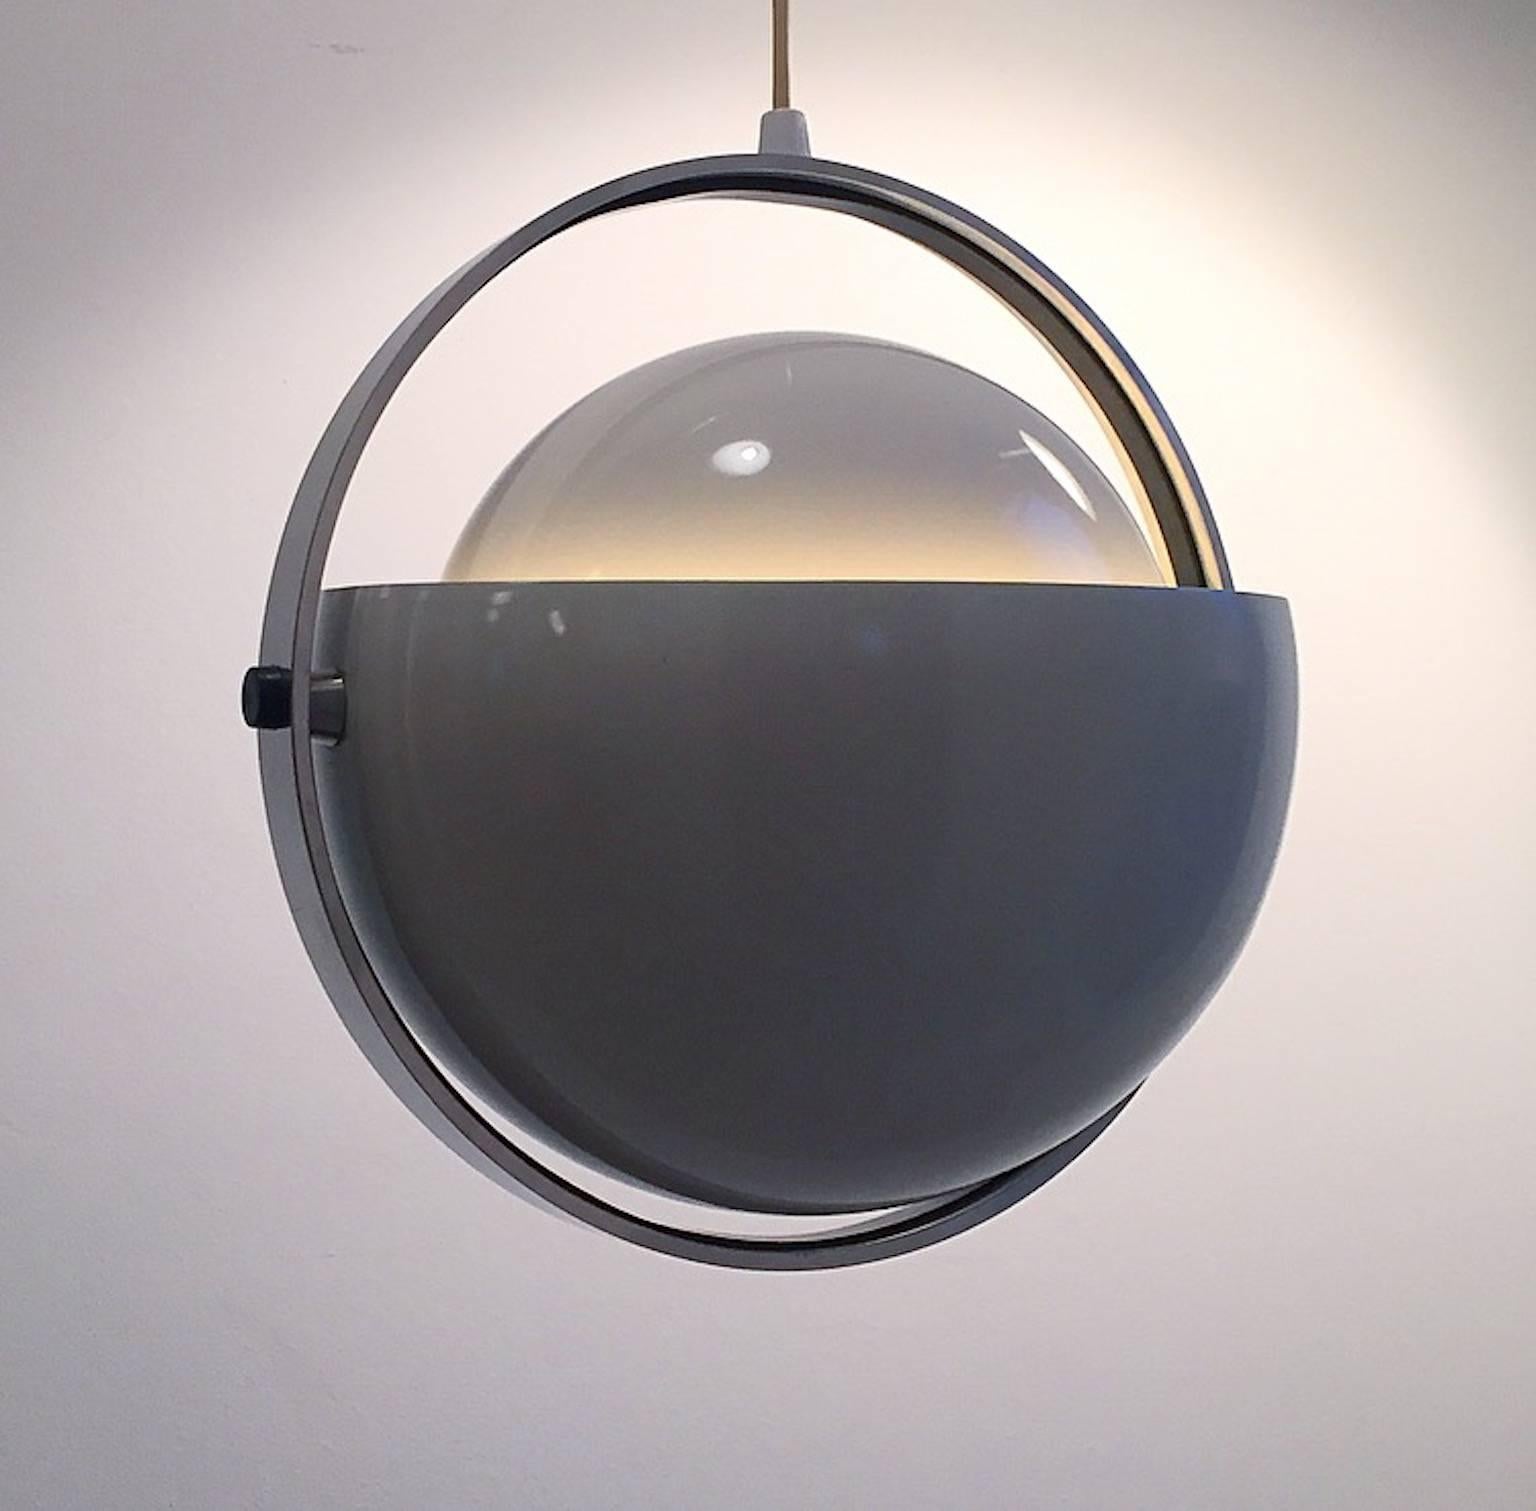 Original Space Age design: An extremely rare pendant 'Moon Light' designed by the danish design team Flemming Brylle and Preben Jakobsen for their company Quality System. 

This multifunctional pendant gives you an atomic age feeling to your home